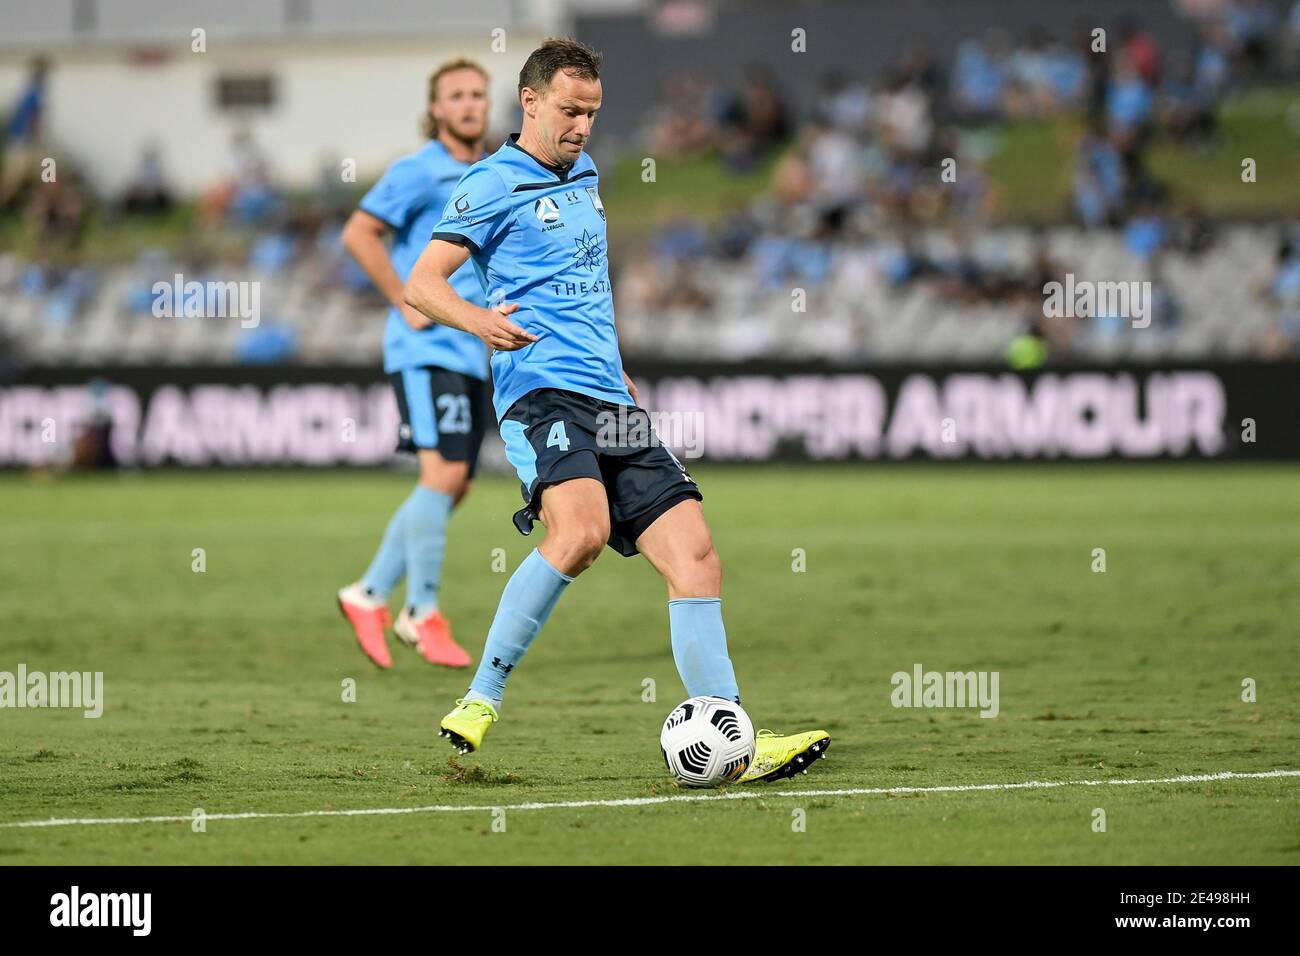 22nd January 2021; Jubilee Stadium, New South Wales, Australia; A League Football, Sydney Football Club versus Central Coast Mariners; Alex Wilkinson of Sydney passes the ball back to his keeper Stock Photo